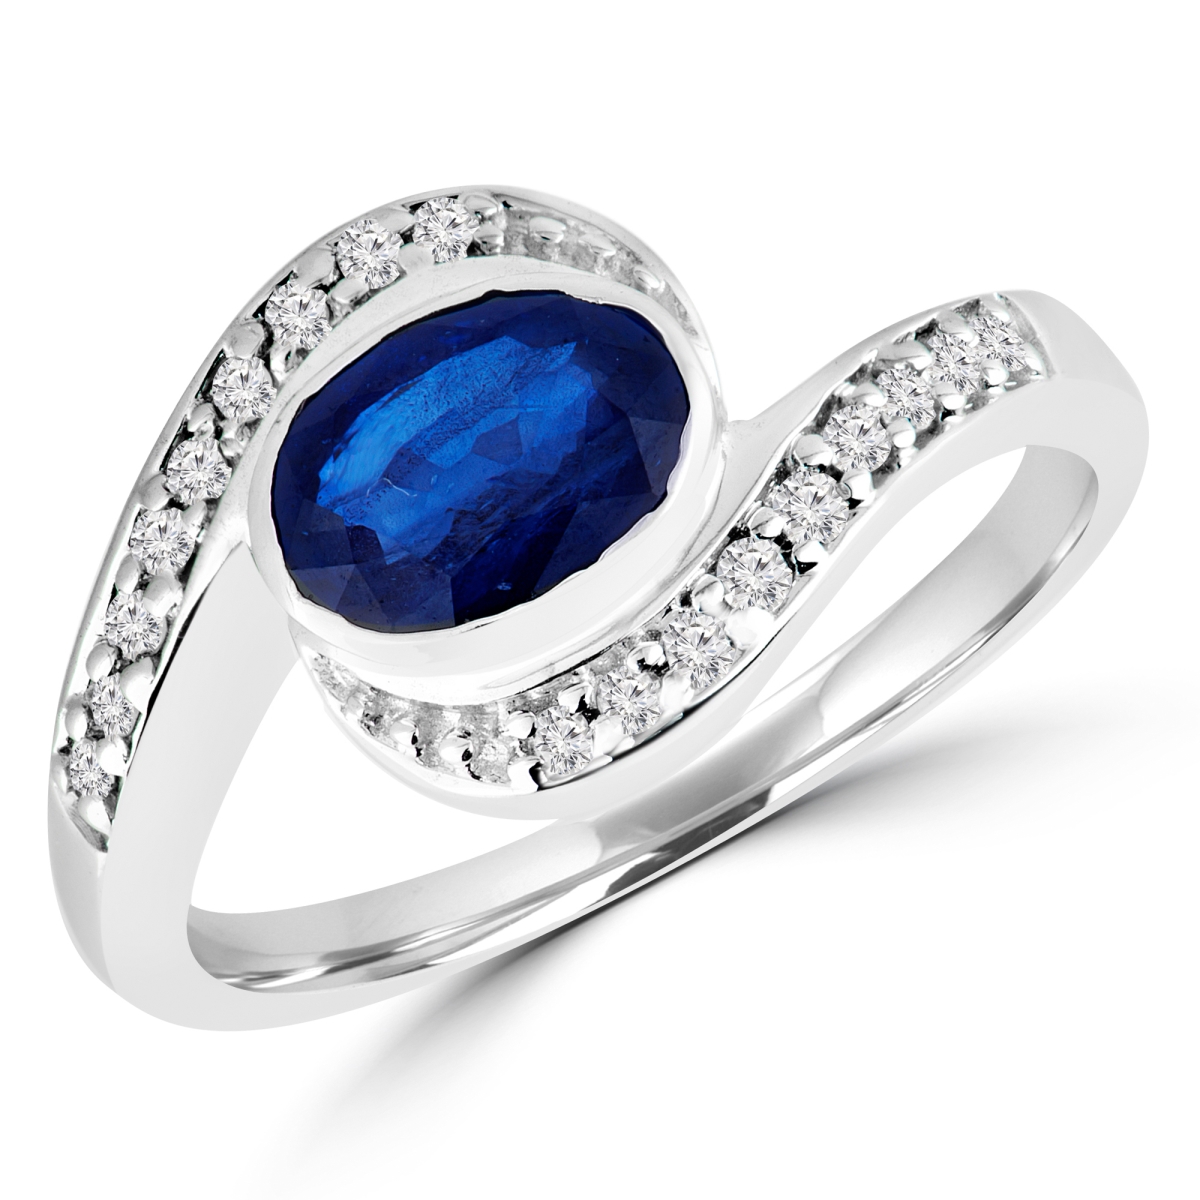 Picture of Majesty Diamonds MDR170020-3.5 1.1 CTW Oval Blue Sapphire Bypass Cocktail Ring in 14K White Gold - 3.5